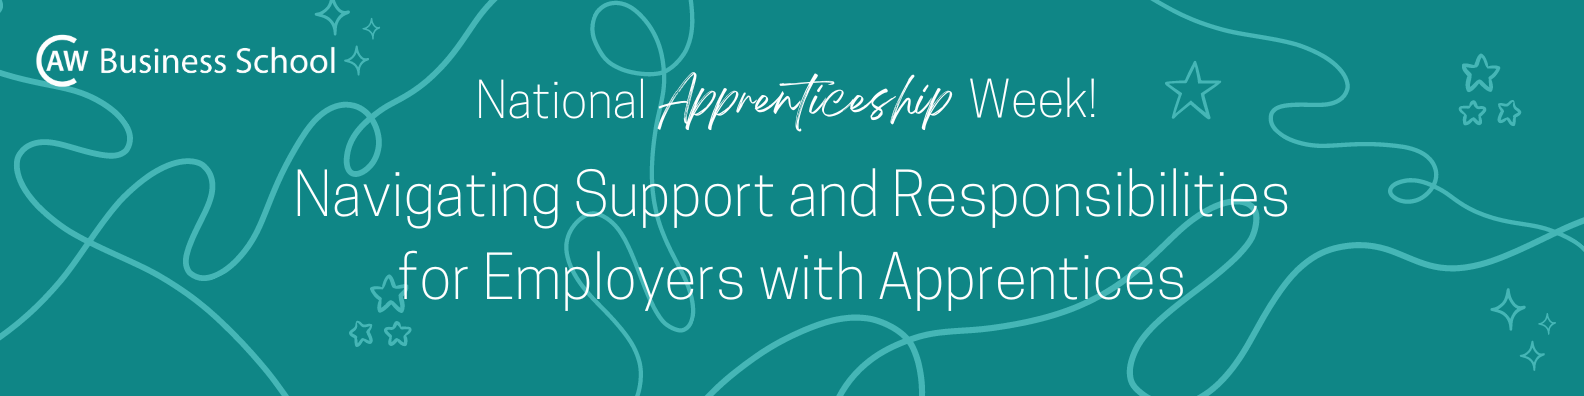 Navigating Support and Responsibilities for Employers with Apprentices